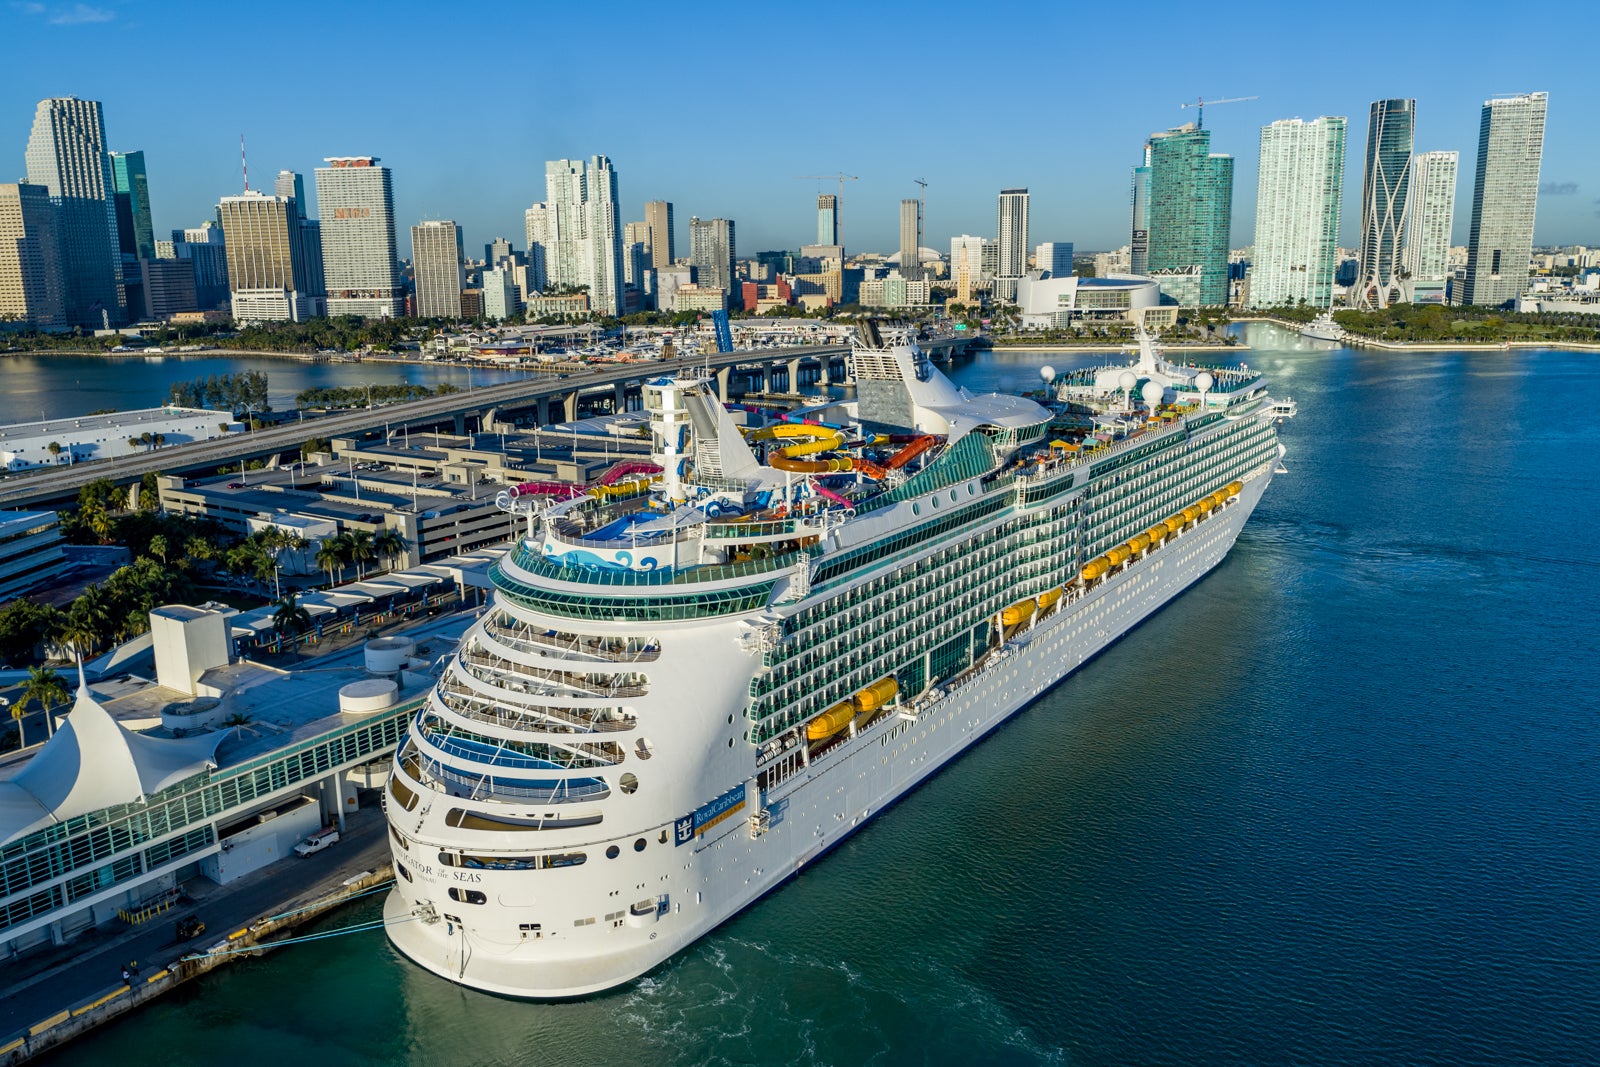 royal caribbean cruise ships smallest to largest